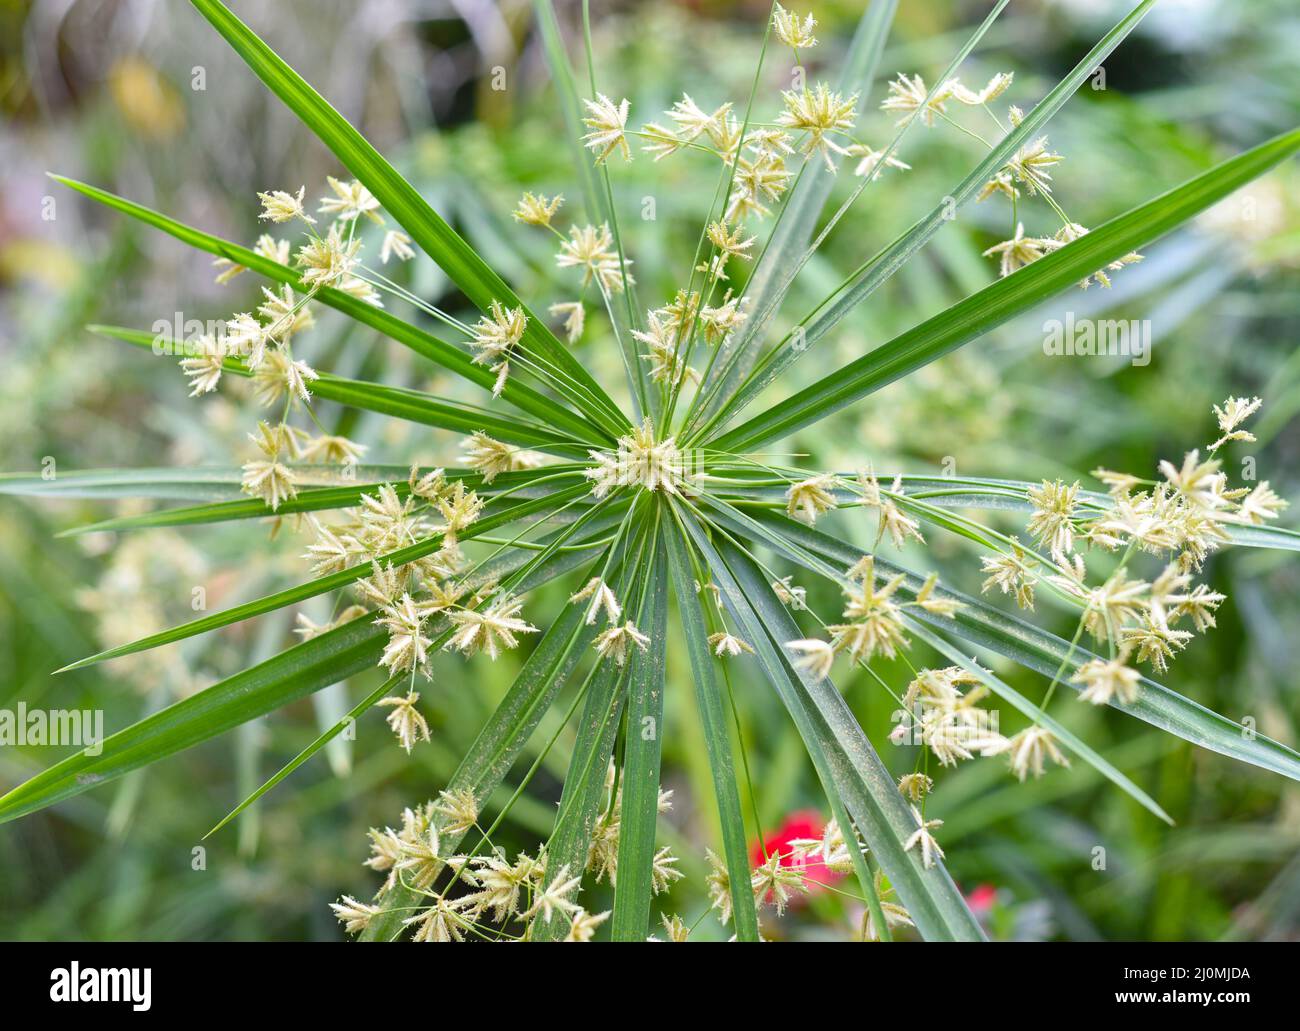 Cyperus croceus plant growing in Asia close up Stock Photo